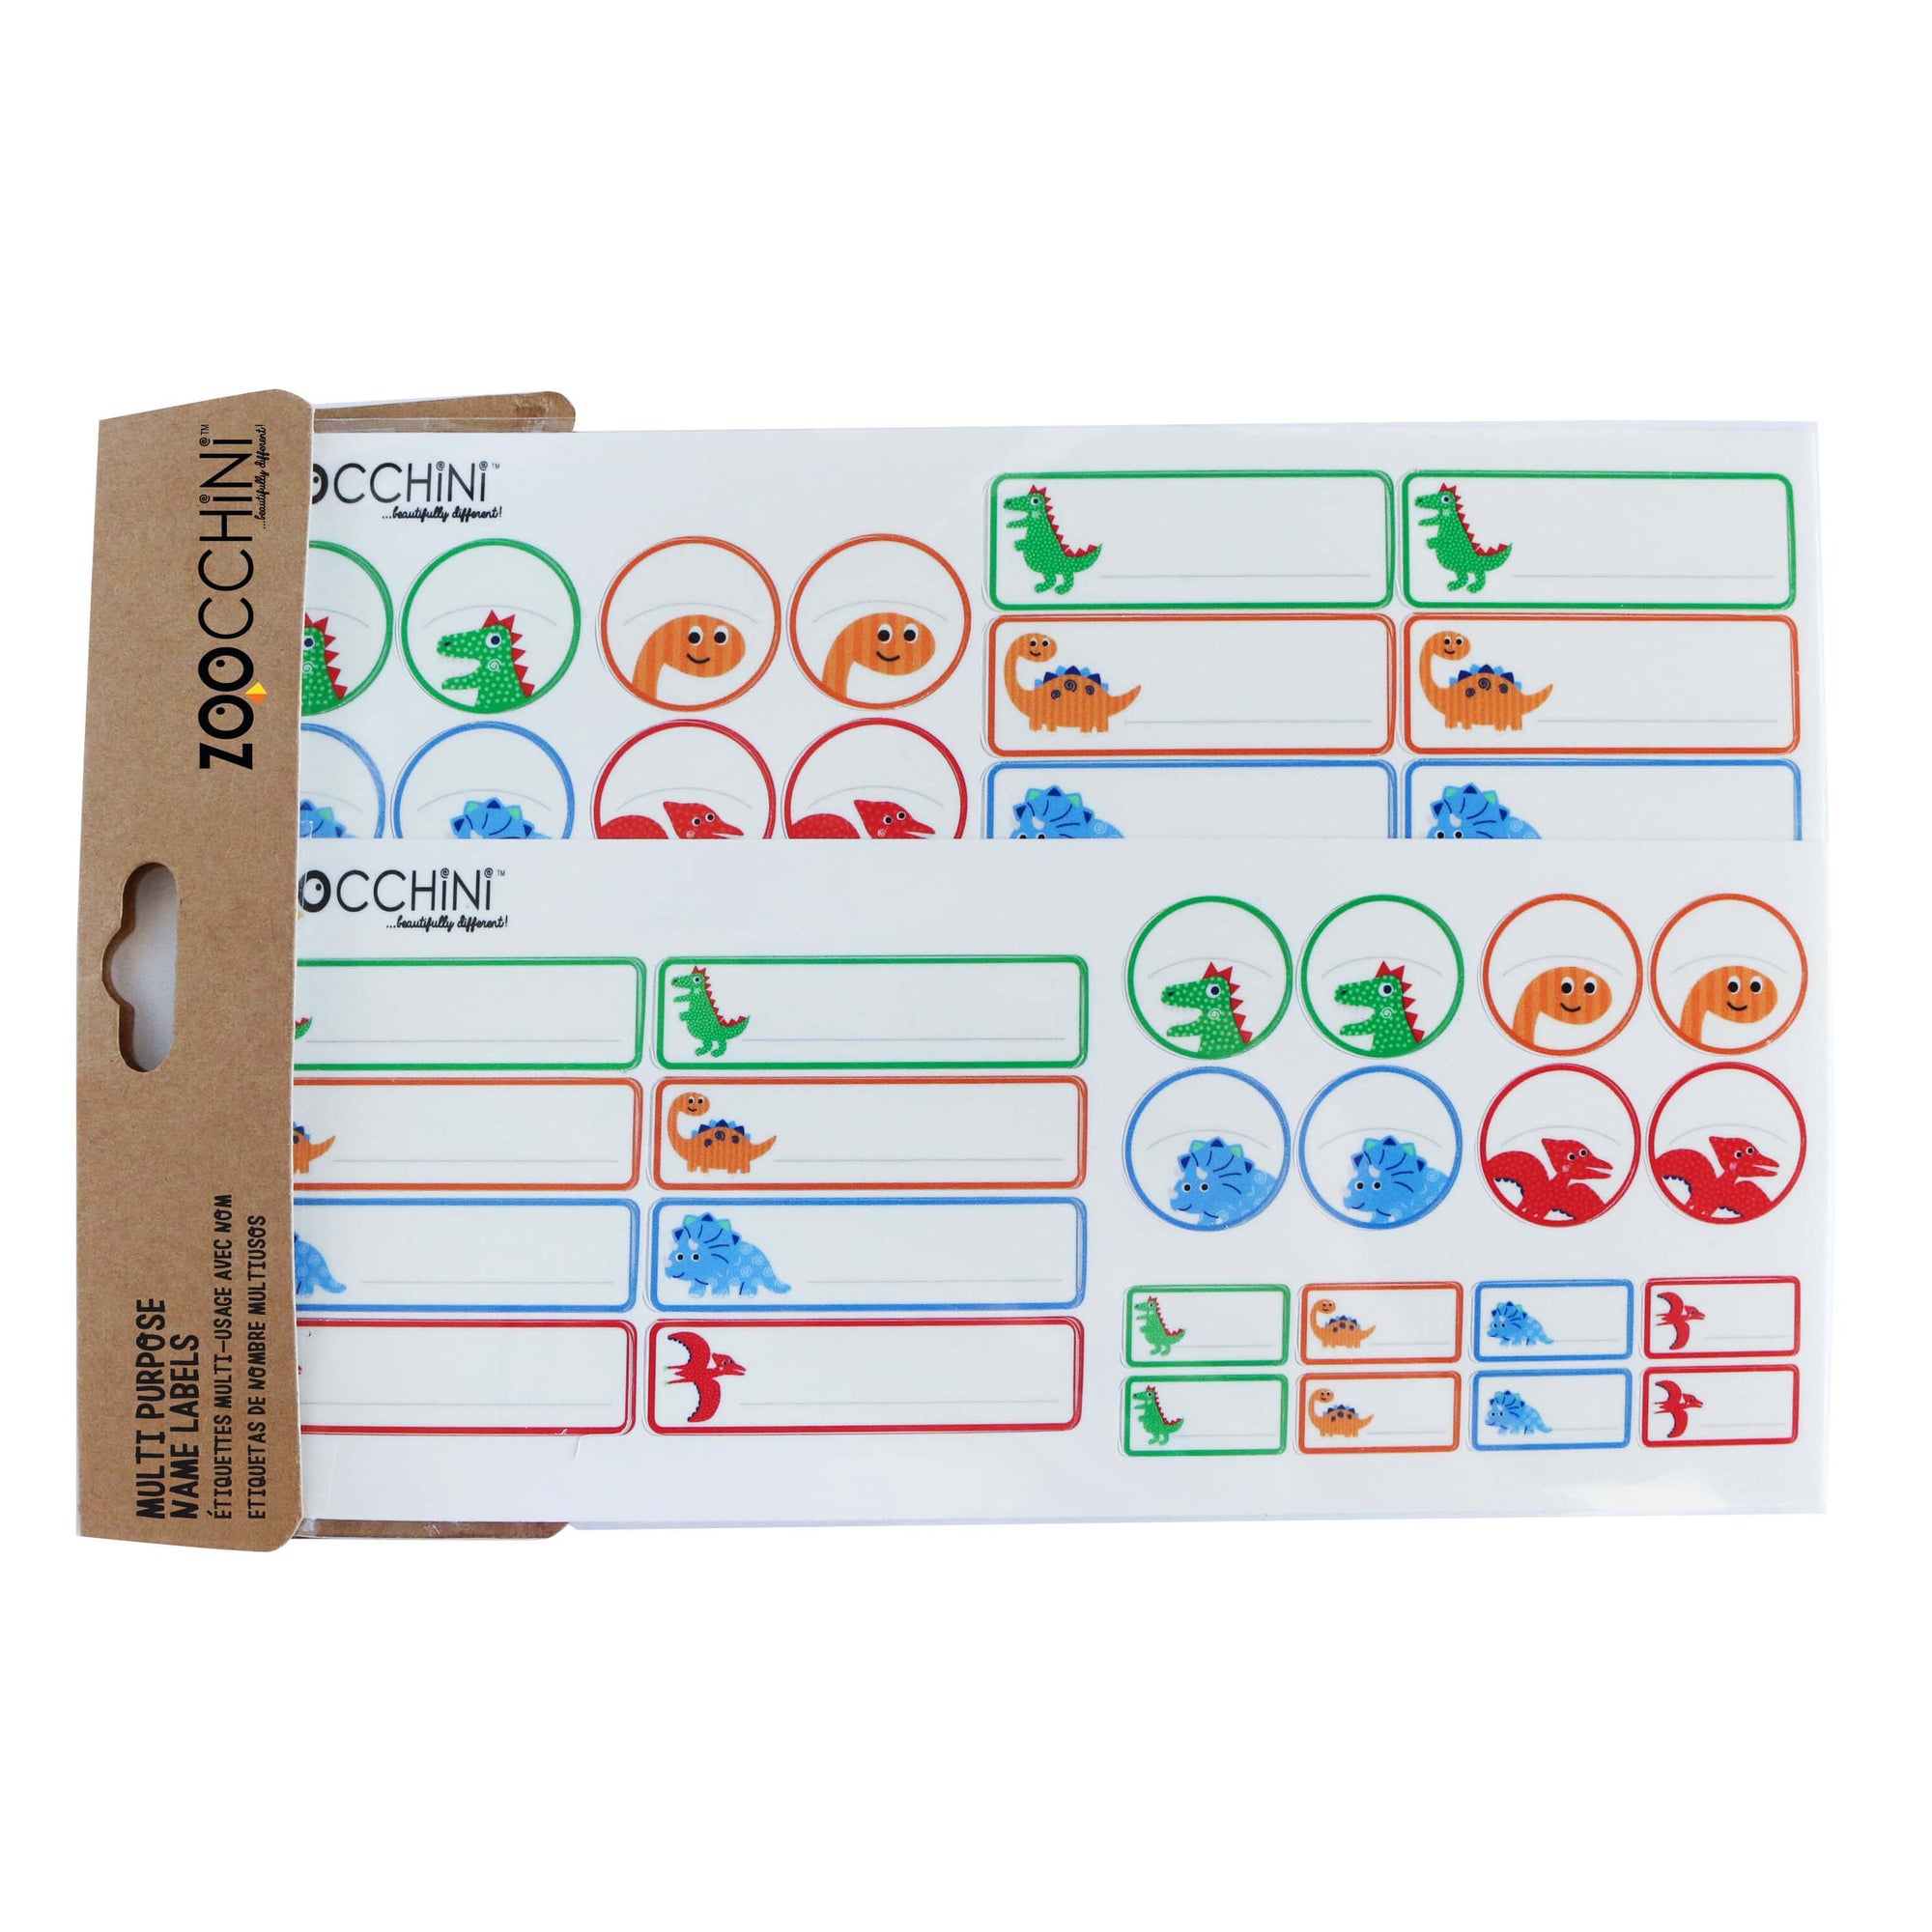 ZOOCCHINI Kids Waterproof Washable Name Labels - Devin the Dinosaur